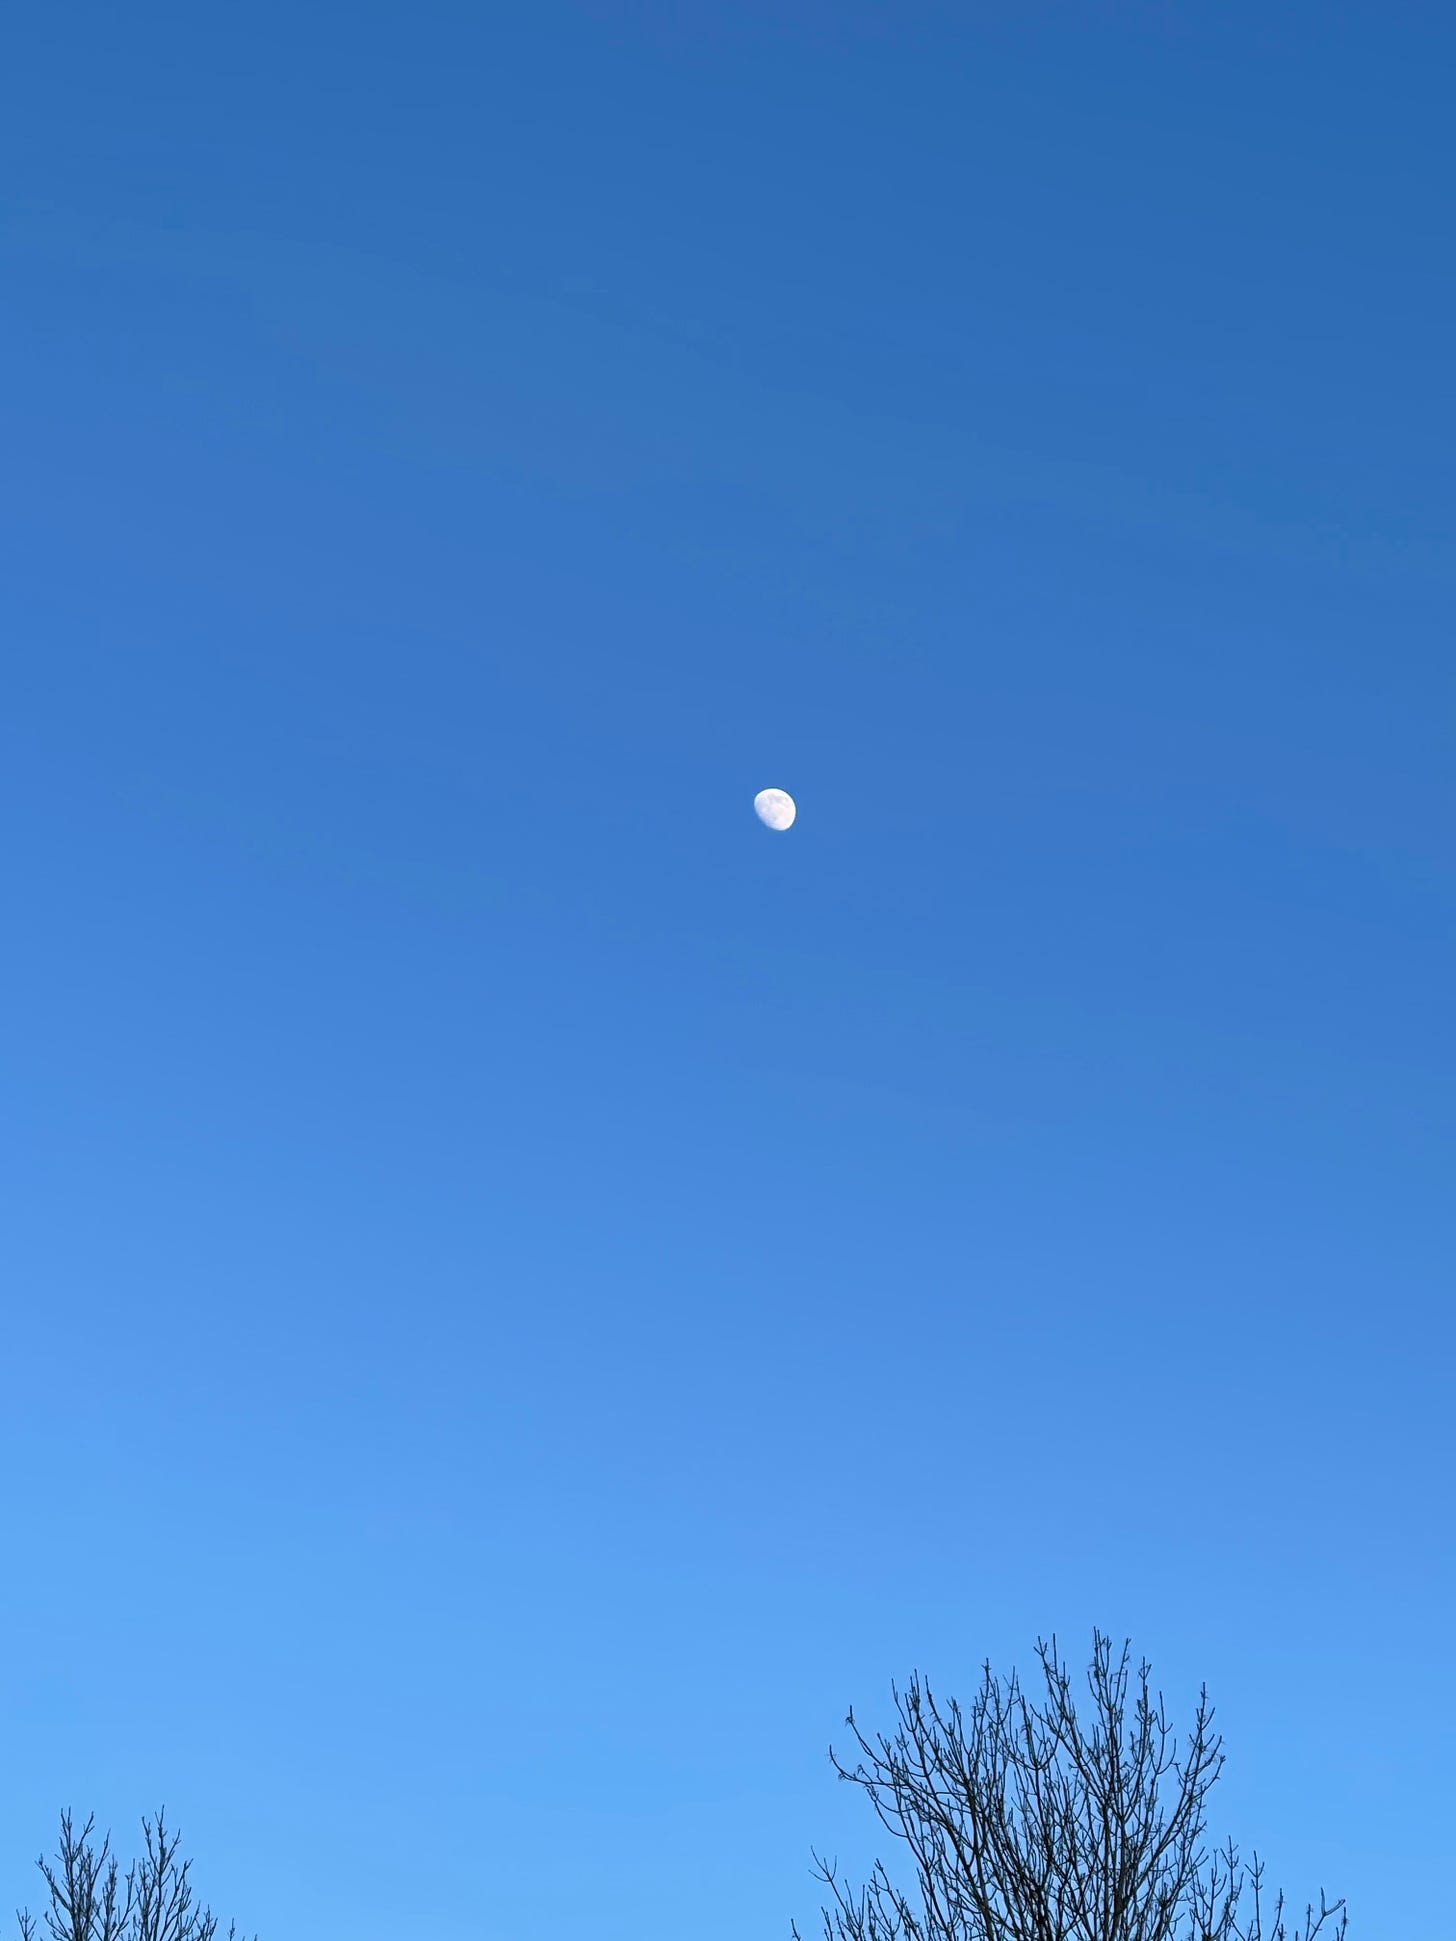 two thirds of the moon centered on a blue sky background